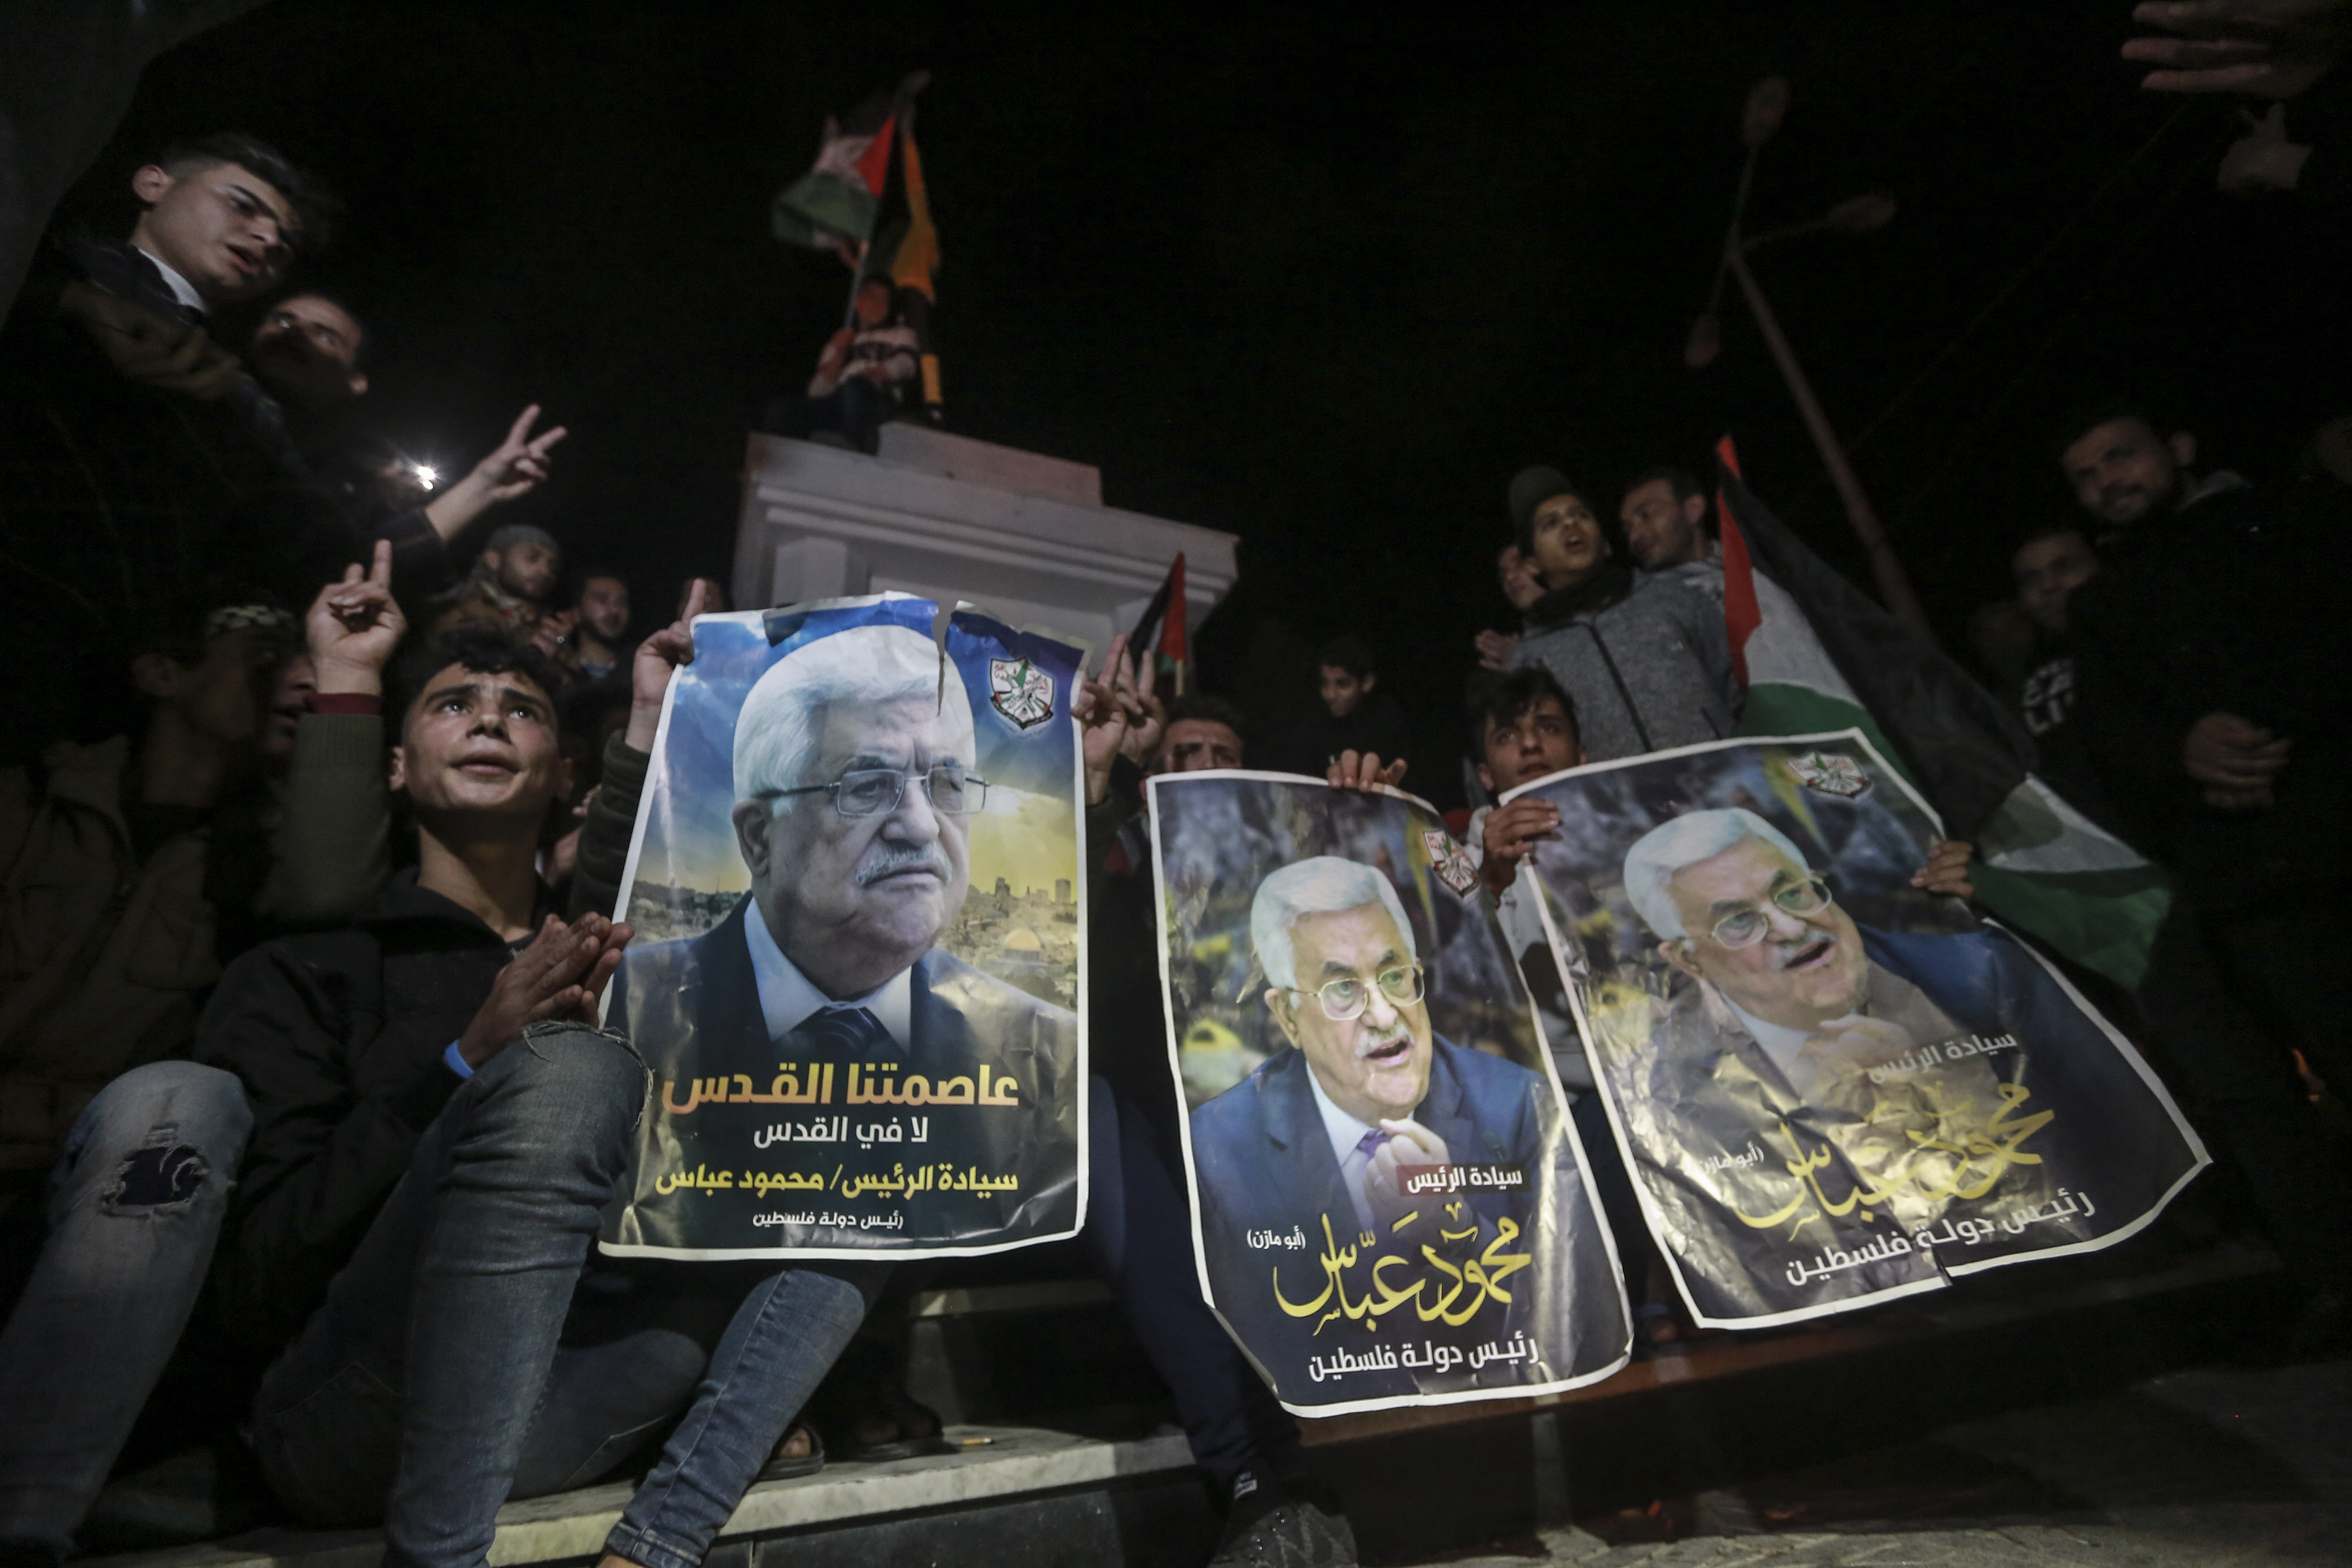 28 January 2020, Palestinian Territories, Gaza City: Palestinian demonstrators hold pictures of Palestinian President Mahmoud Abbas during a demonstration against US President Donald Trump's Middle East peace plan. Photo by: Mohammed Talatene/picture-alliance/dpa/AP Images